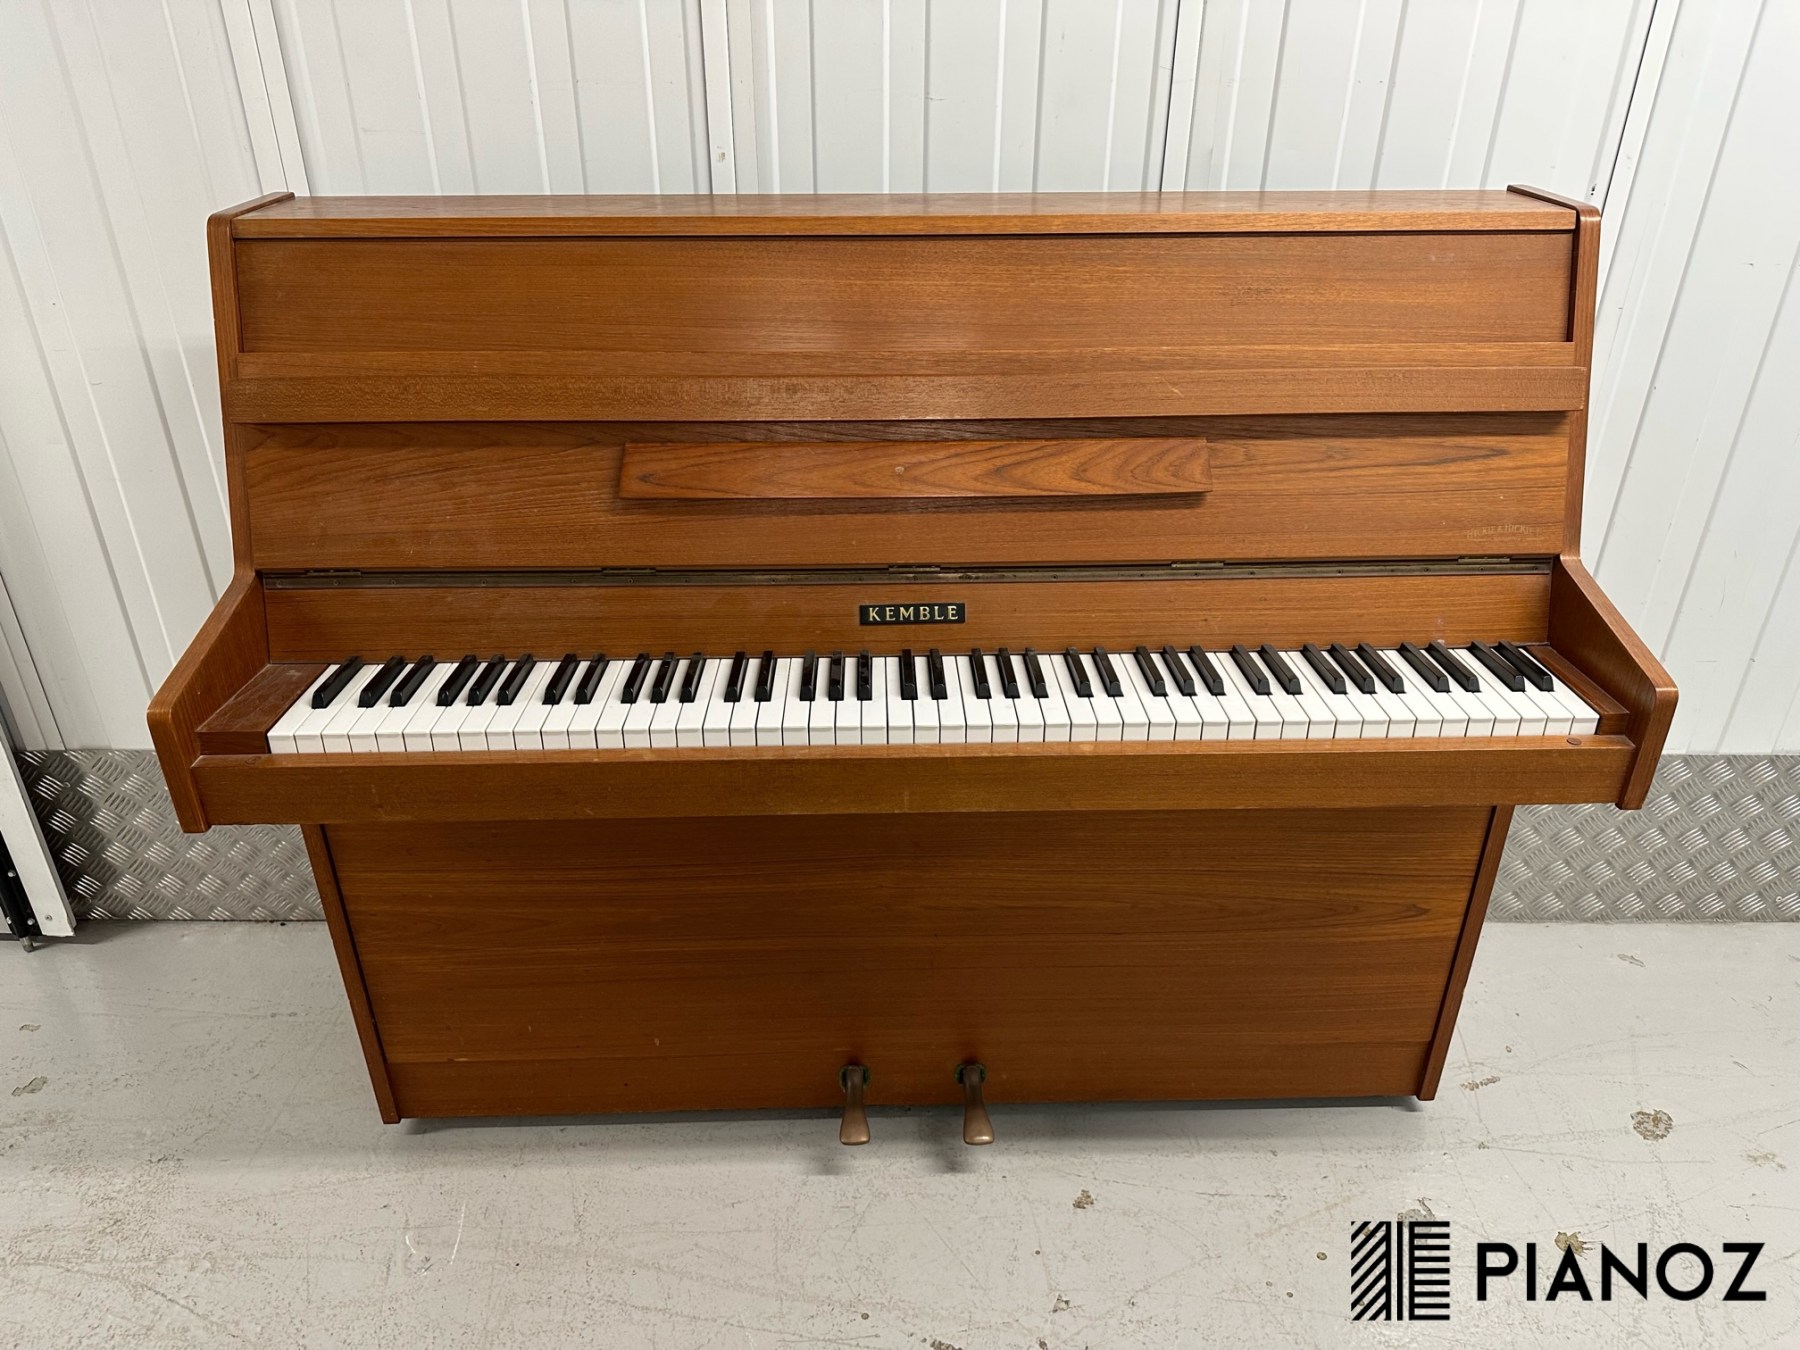 Kemble Compact Upright Piano piano for sale in UK